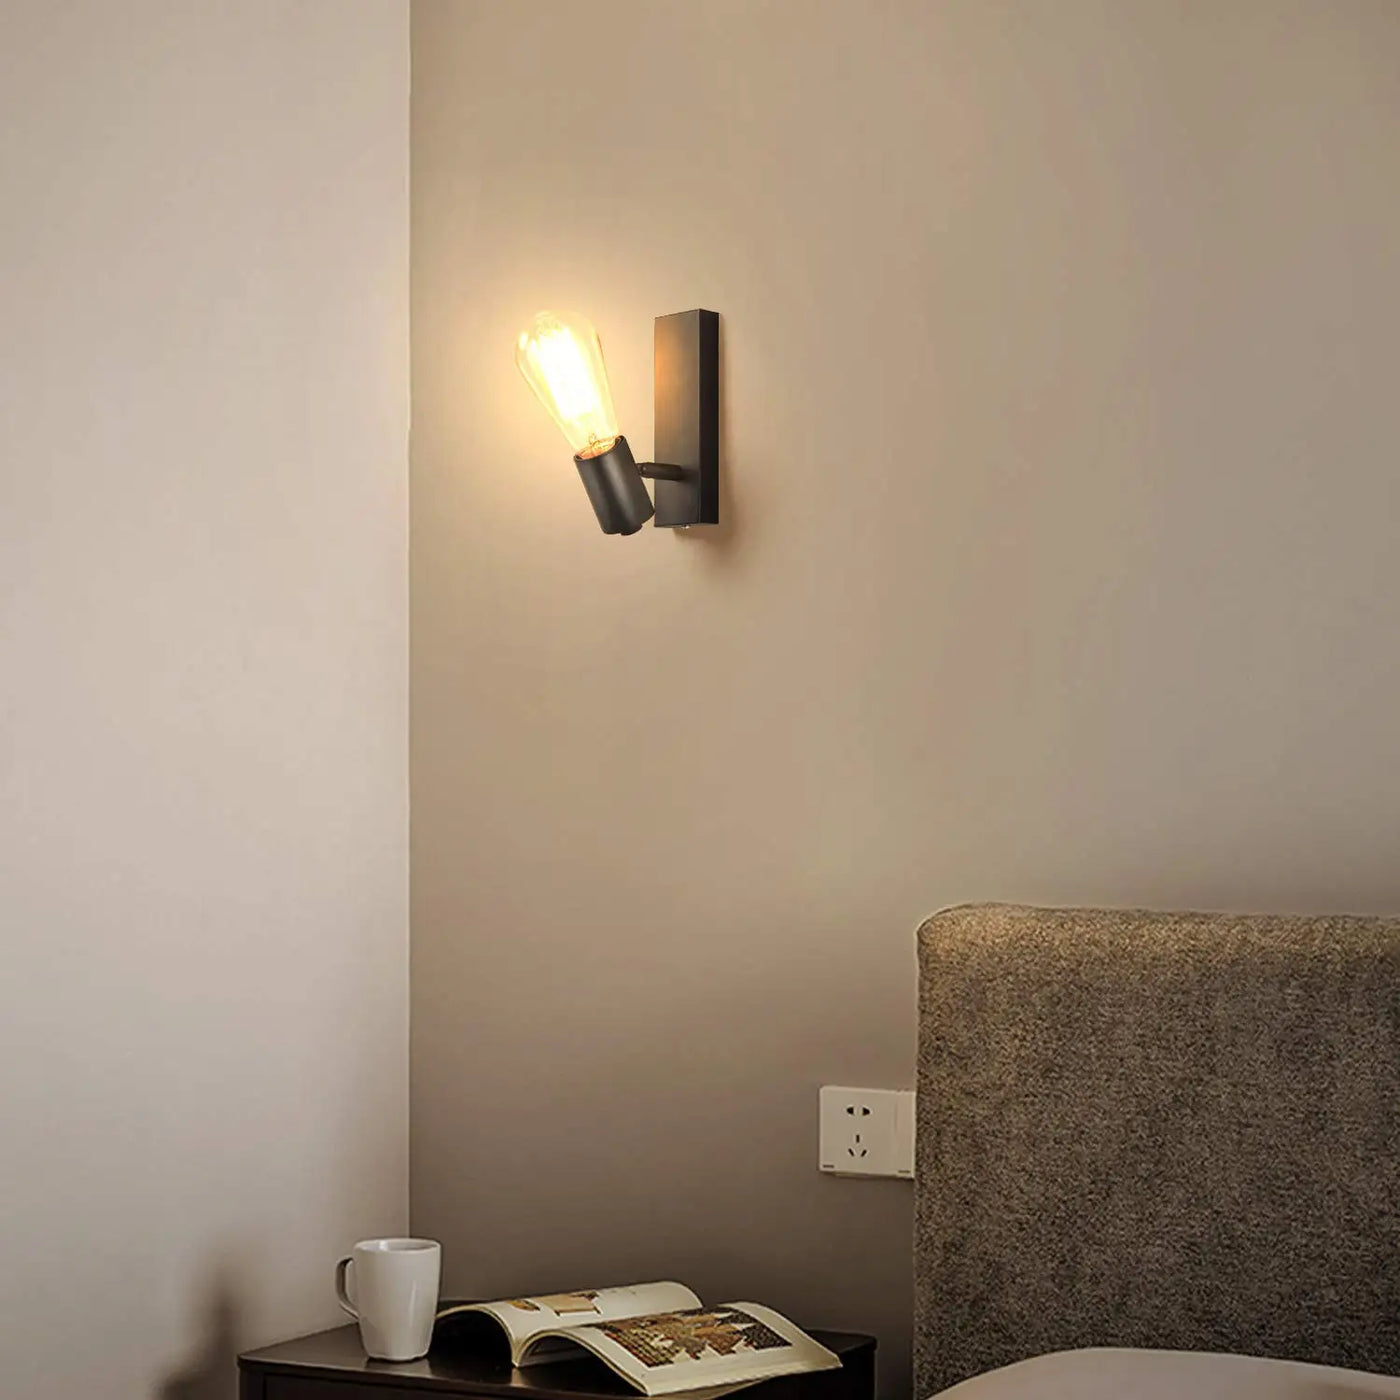 Vintage Swivel Wall Lamp with Rotating Spot - Versatile Lighting Solution for Any Room